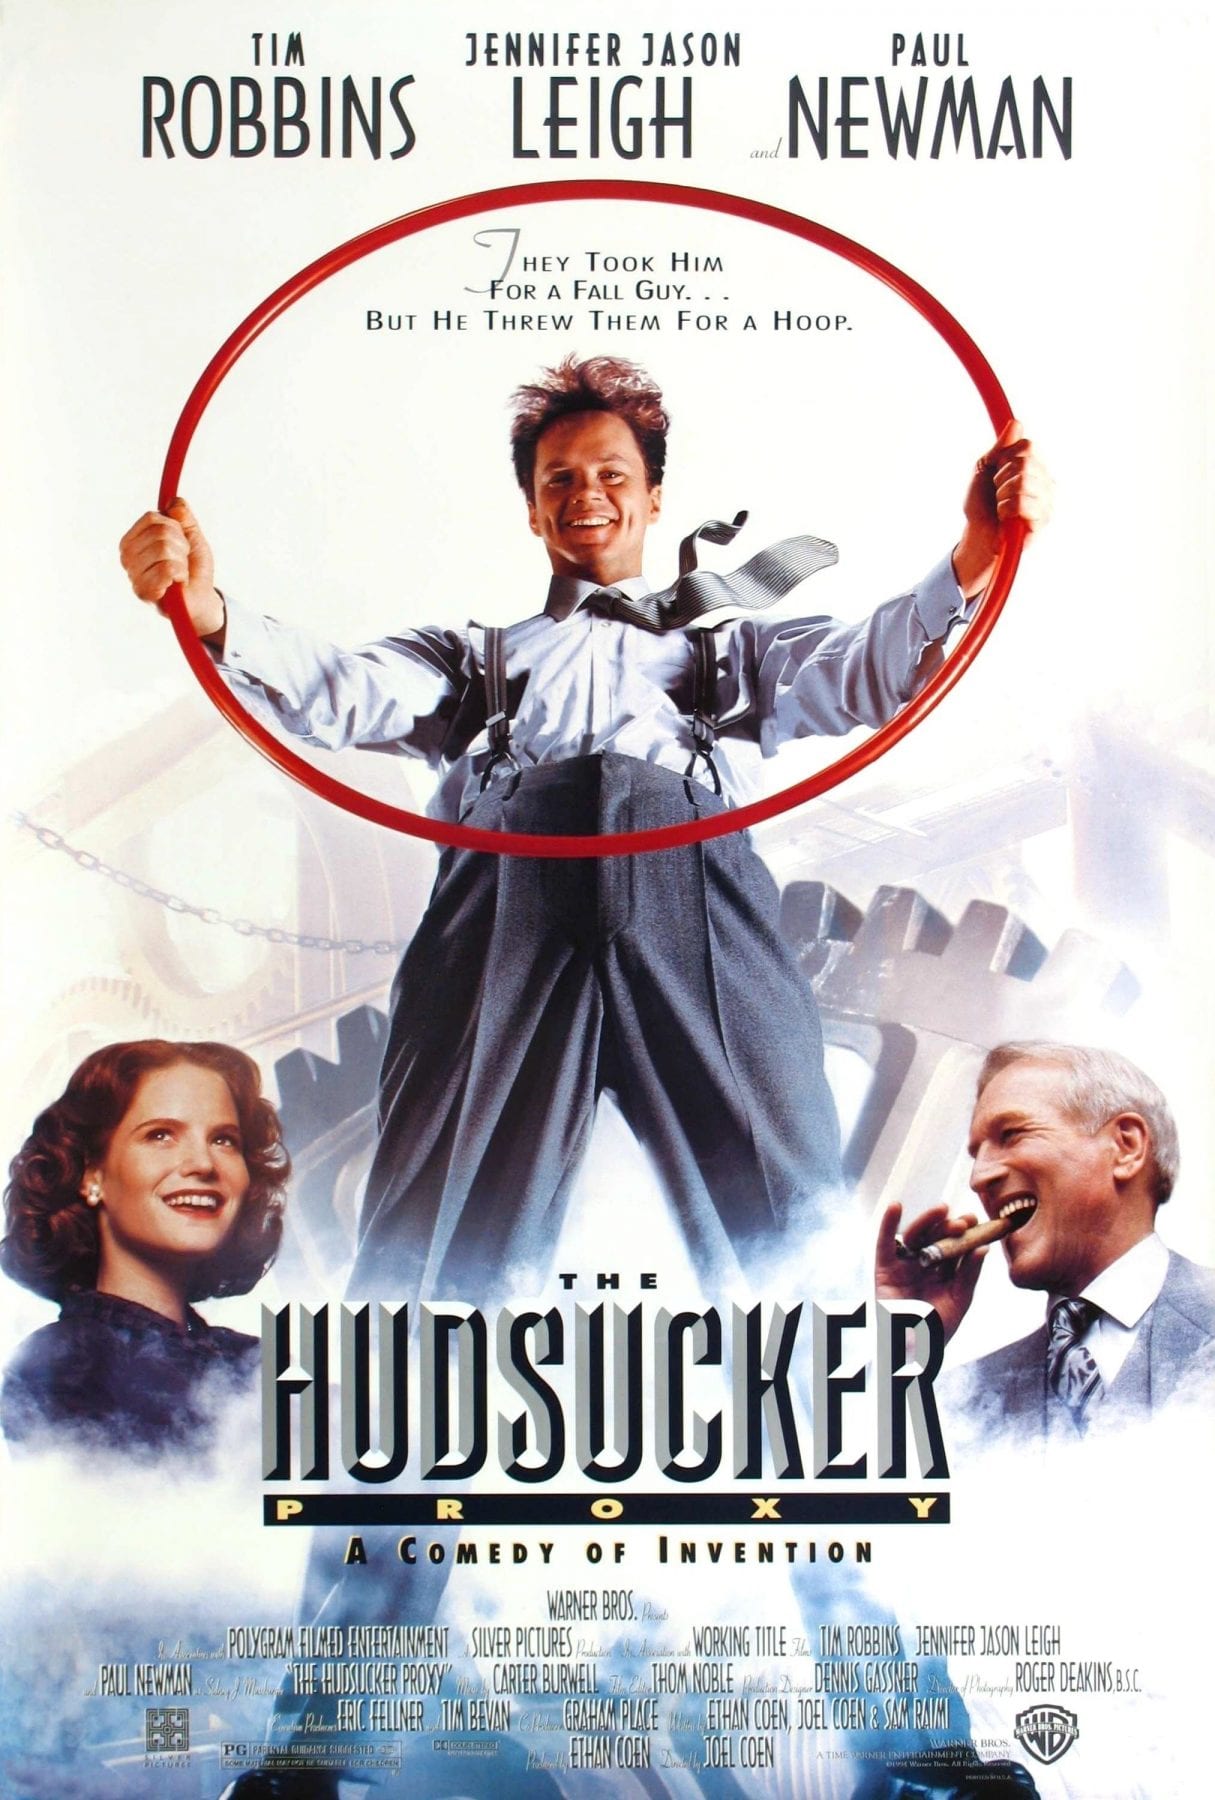 The movie poster for The Hudsucker Proxy is old school and silly.